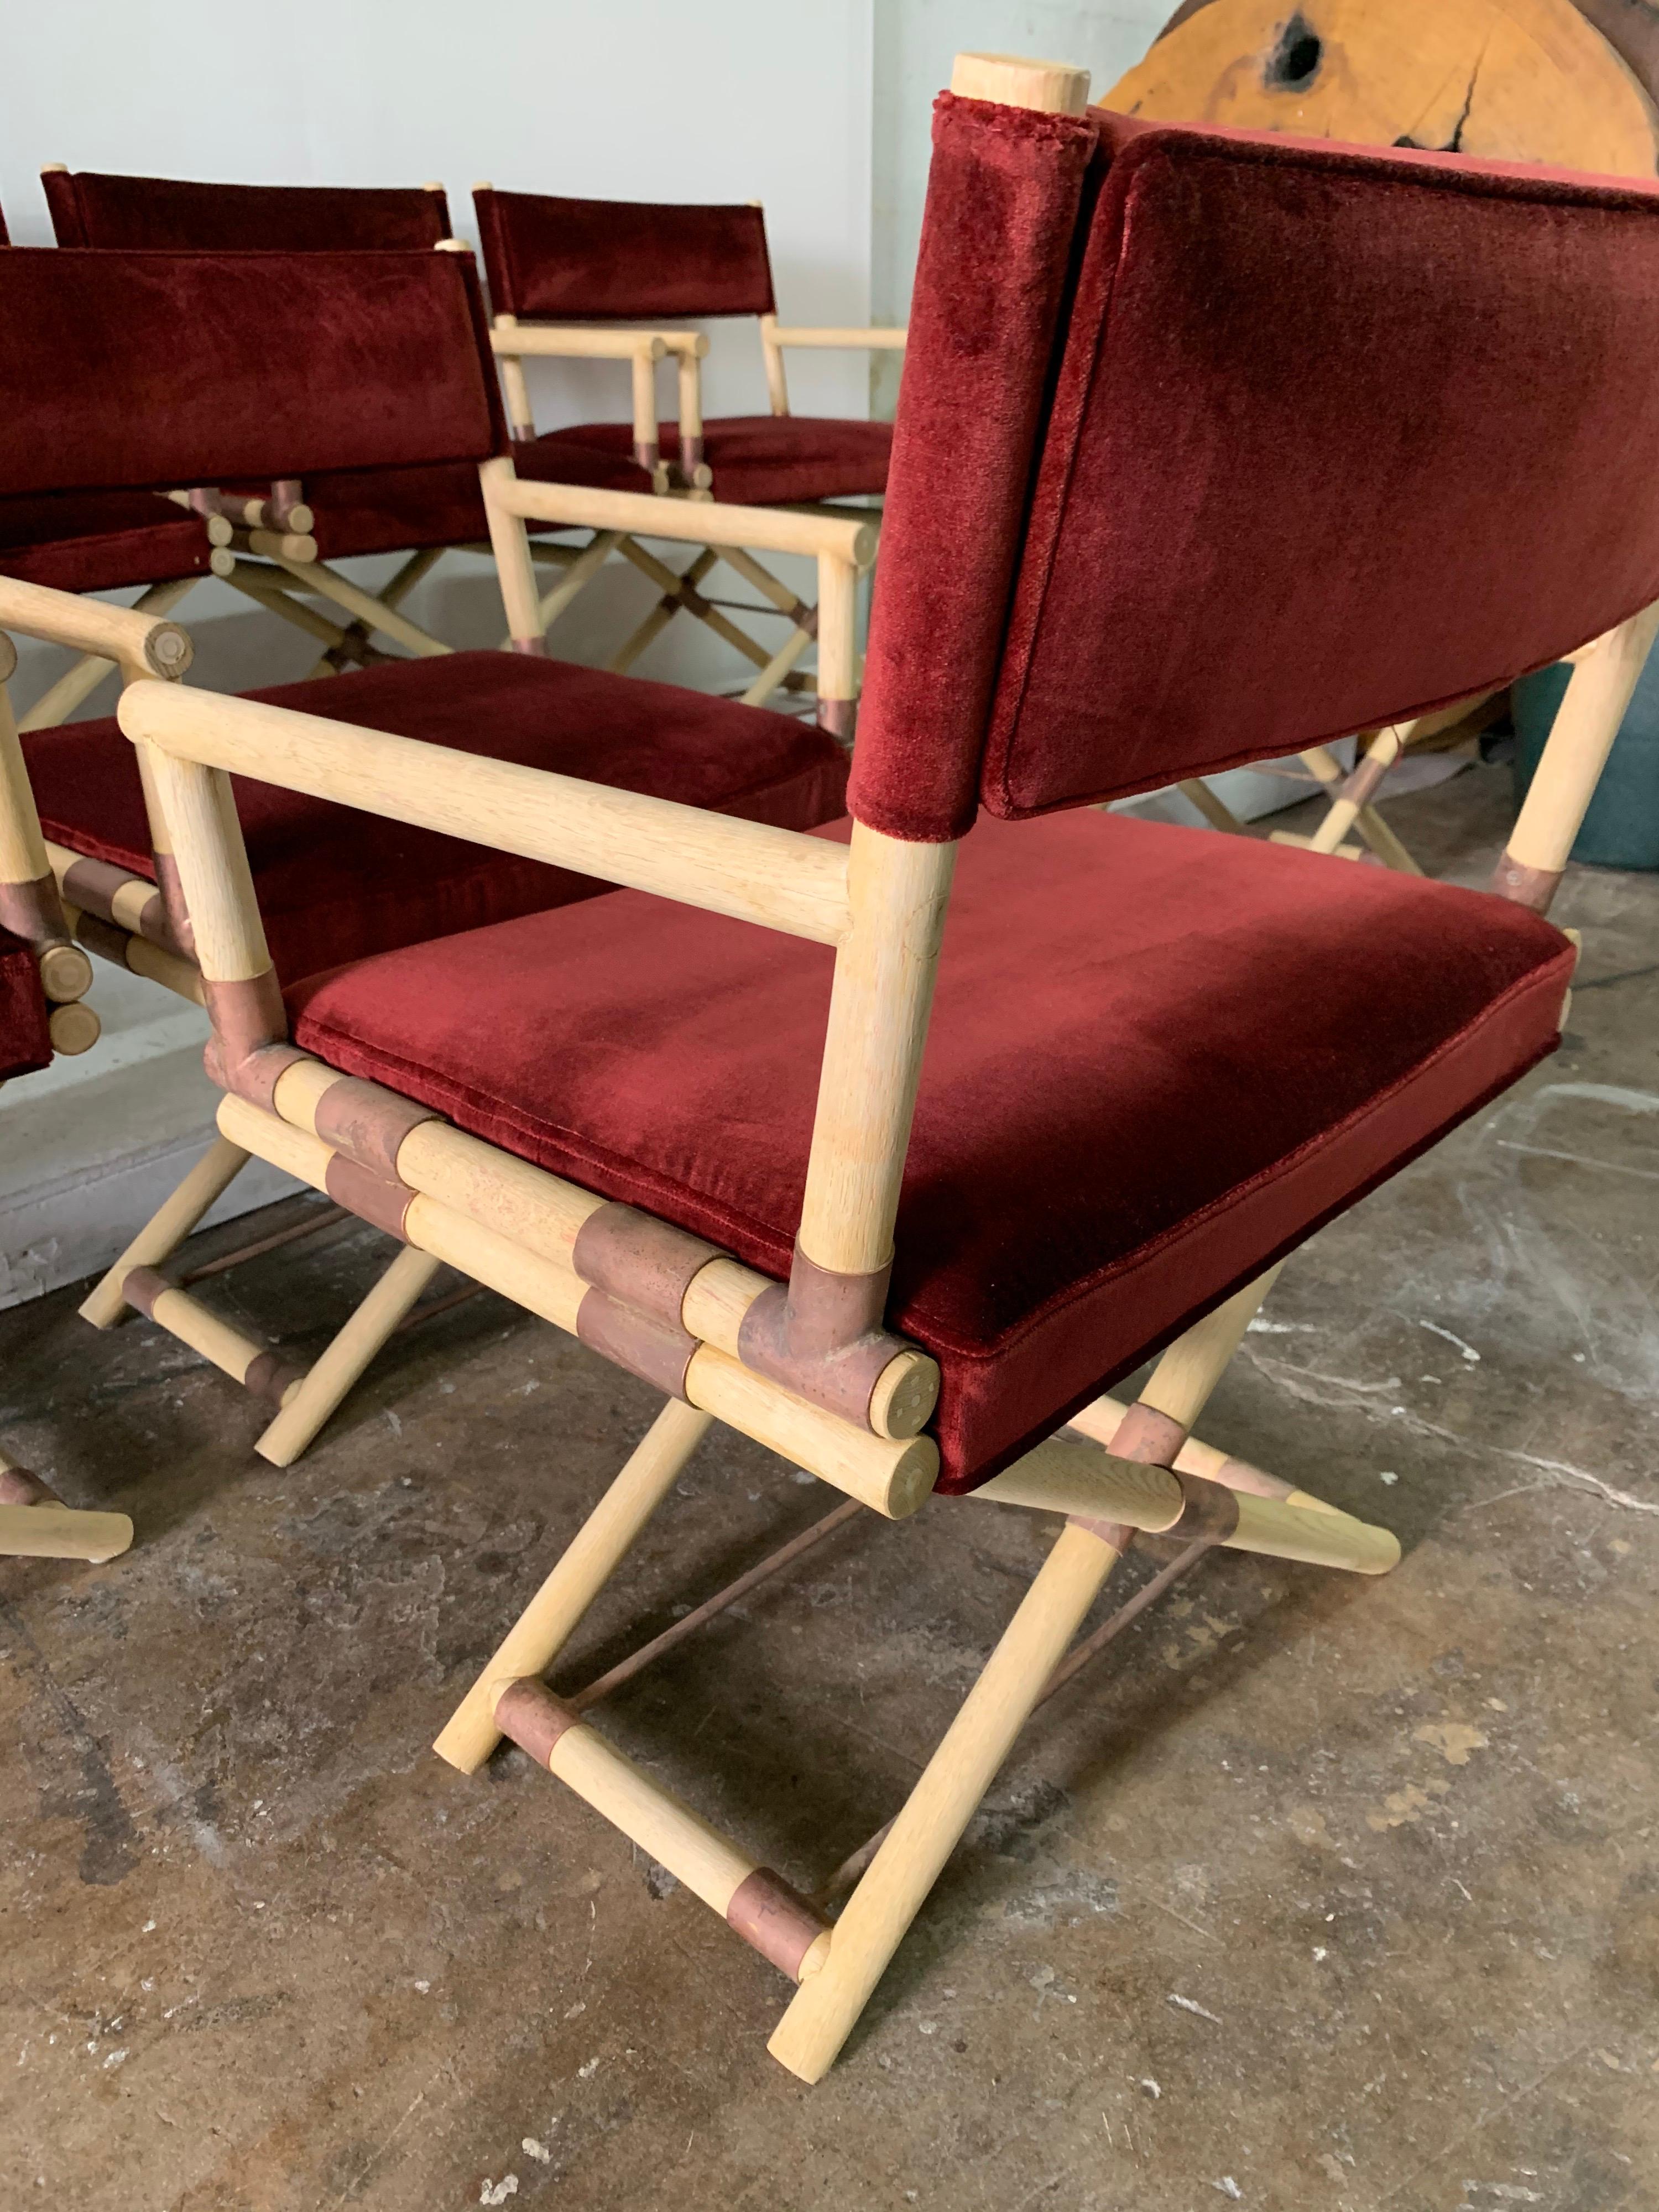 All armchairs these Classic Director style chairs in bleached unfinished wood, keeping a rustic and beautiful natural look. Rustic copper finish joints. Overall a great grouping, solid and recently upholstered in burgundy cotton velvet fabric. These